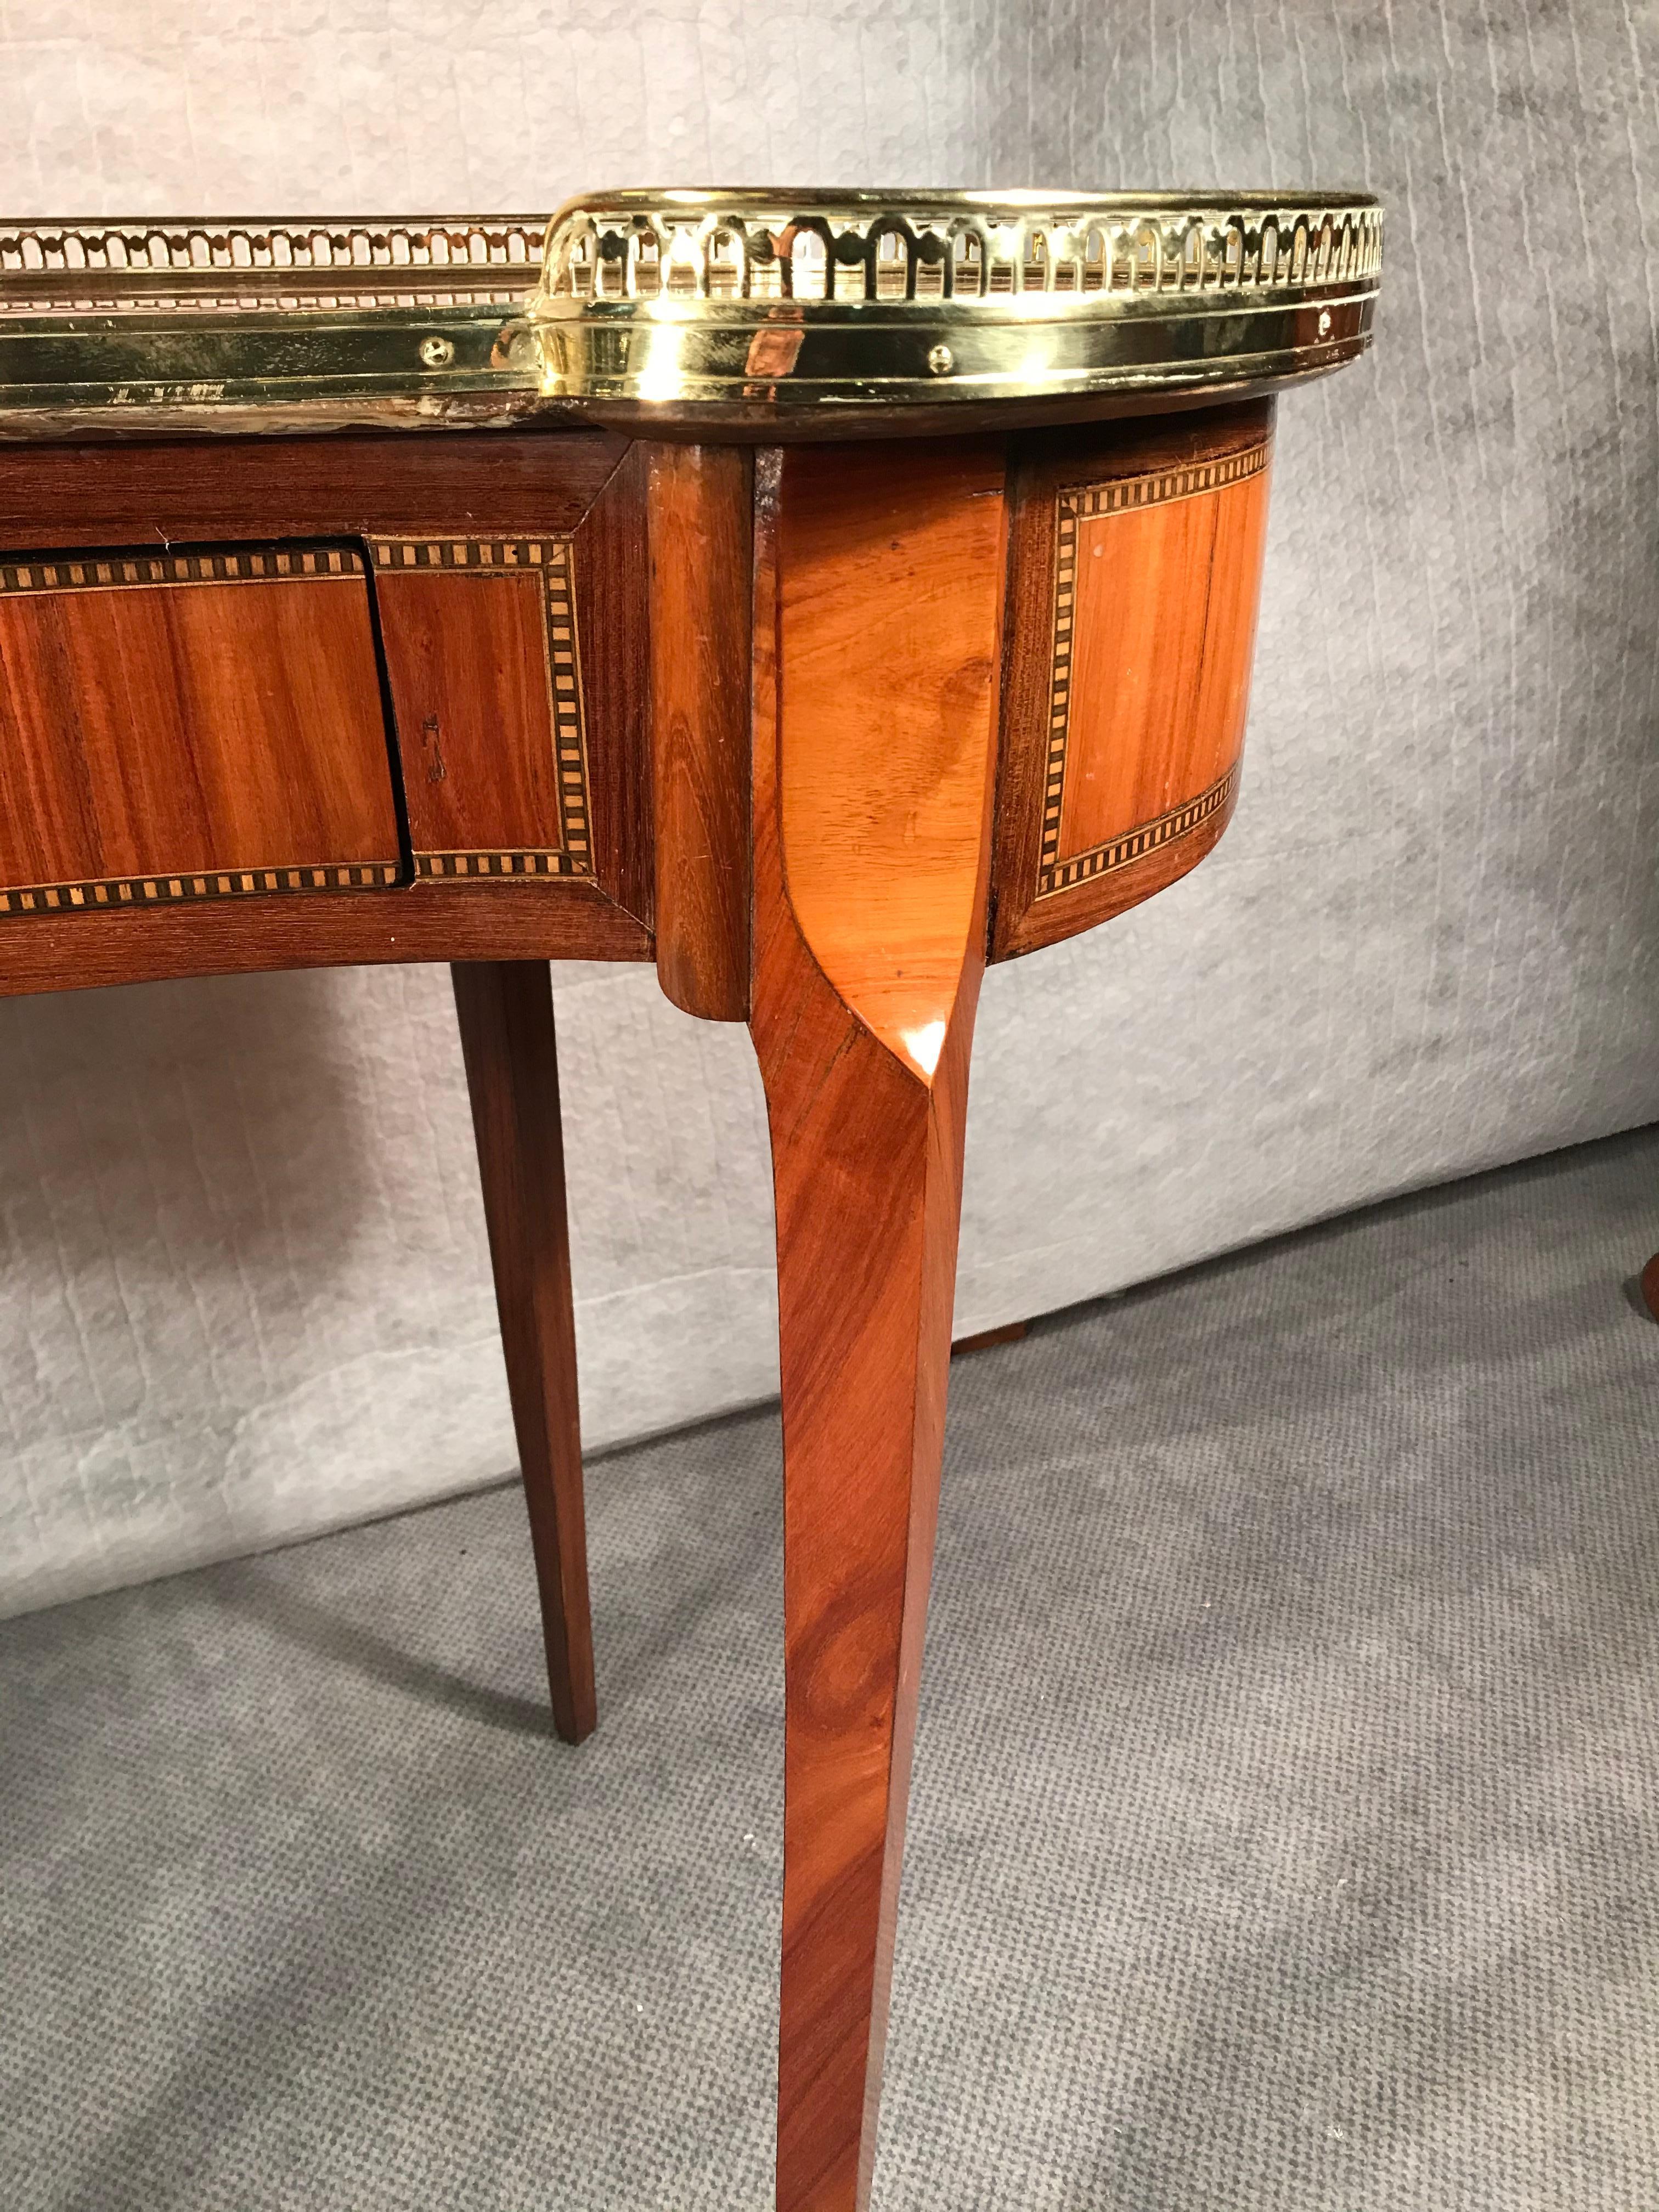 Small kidney shaped Louis XVI style desk made in France around 1860.
Beautiful rosewood and king wood veneer, with exquisite brass gallery. 
In very good original condition.